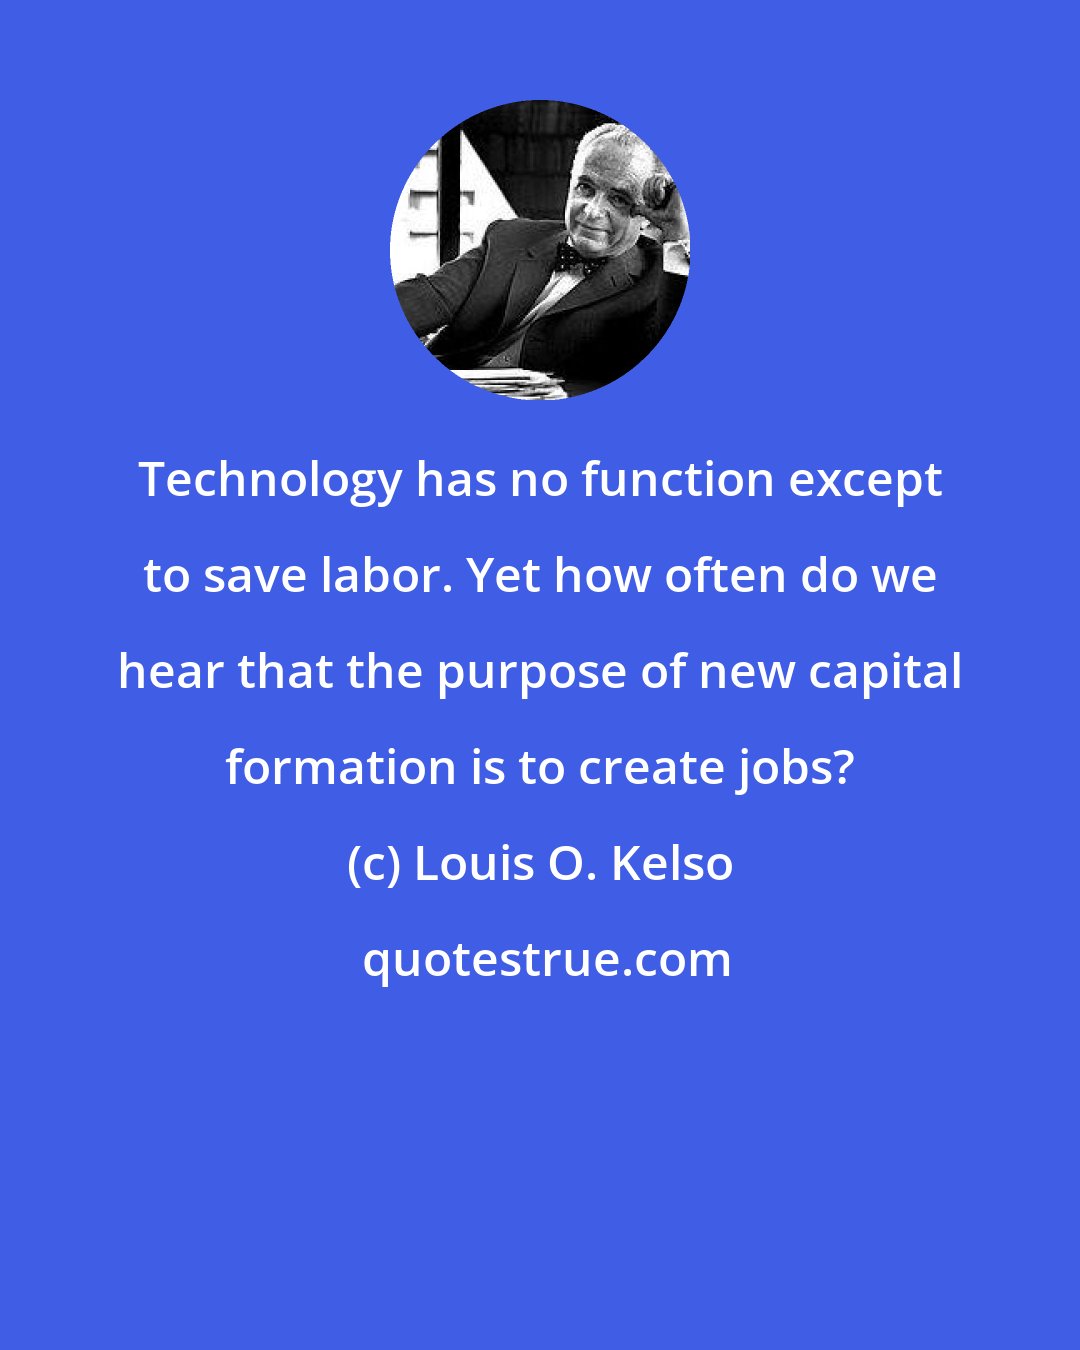 Louis O. Kelso: Technology has no function except to save labor. Yet how often do we hear that the purpose of new capital formation is to create jobs?